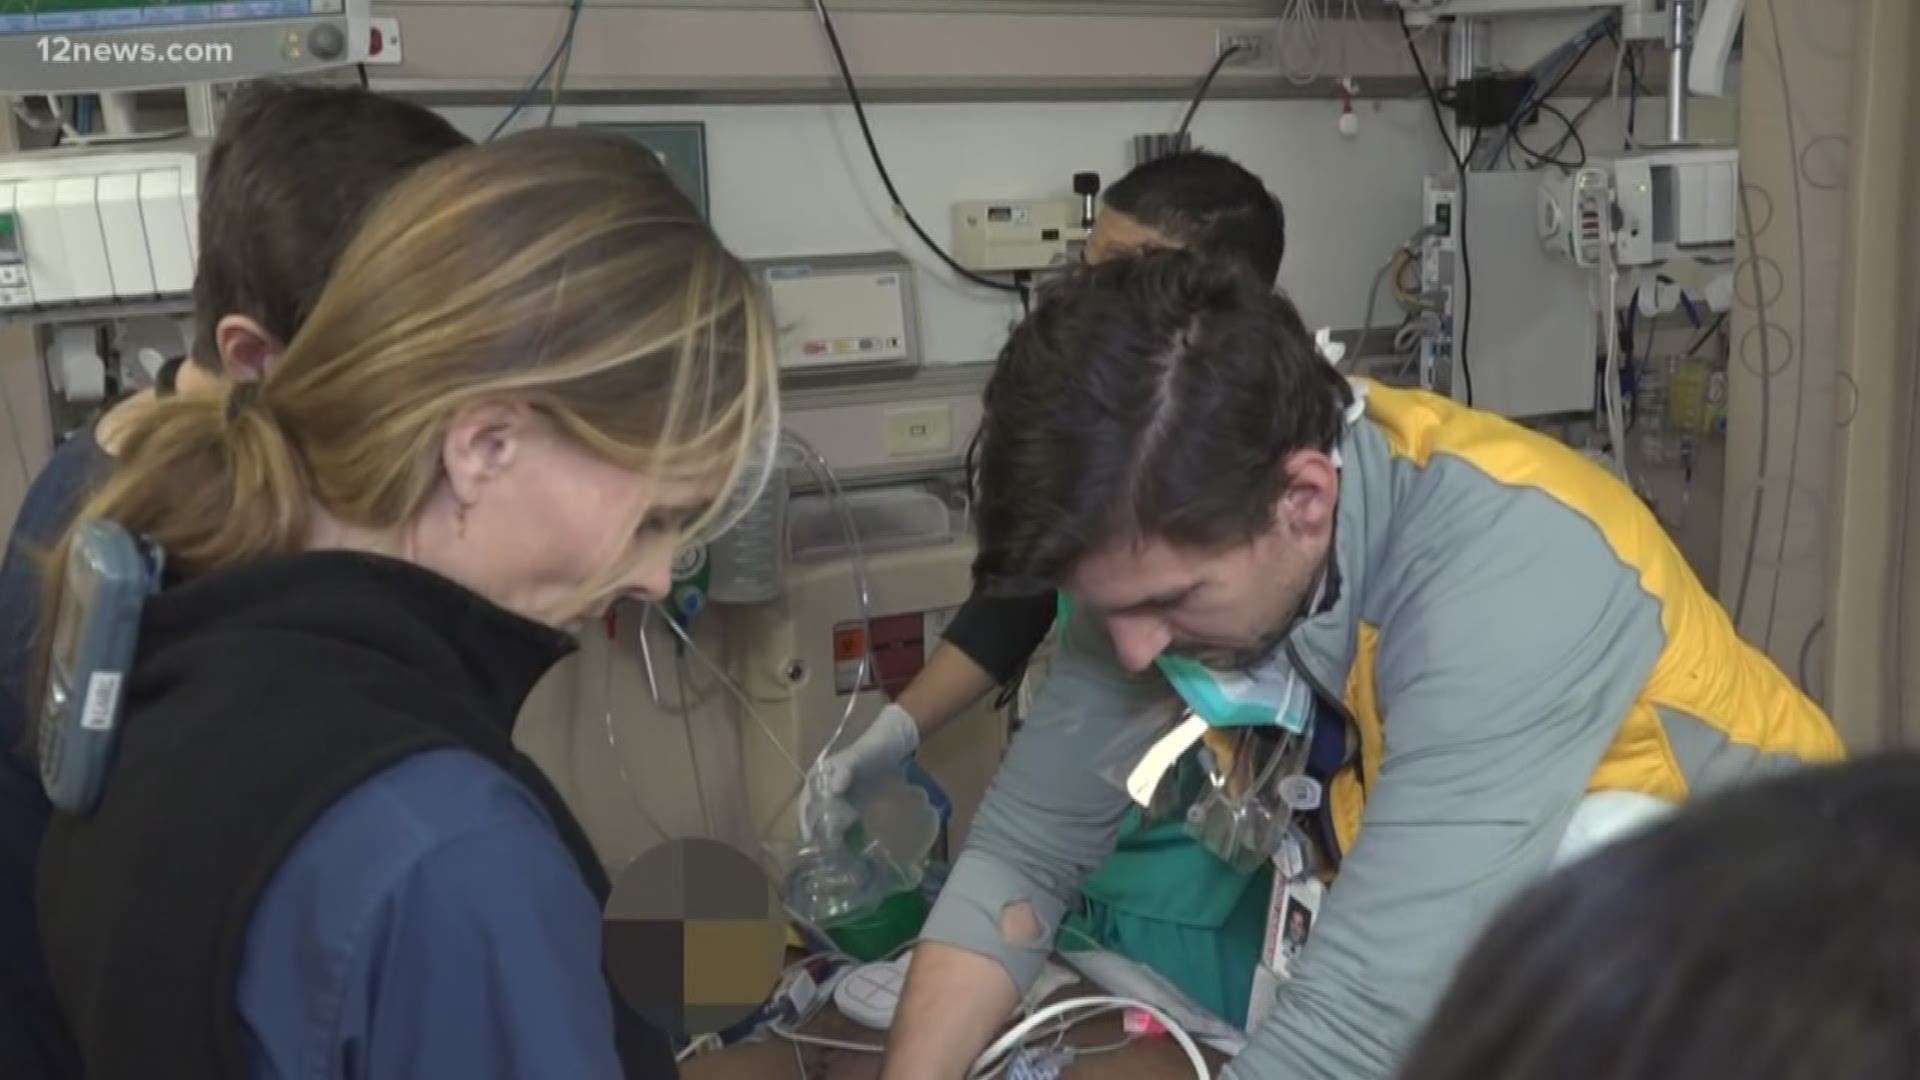 Team 12's Mike Gonzalez got an inside look at how residents at Maricopa Medical Center's emergency department train under the most stressful life-and-death situations.